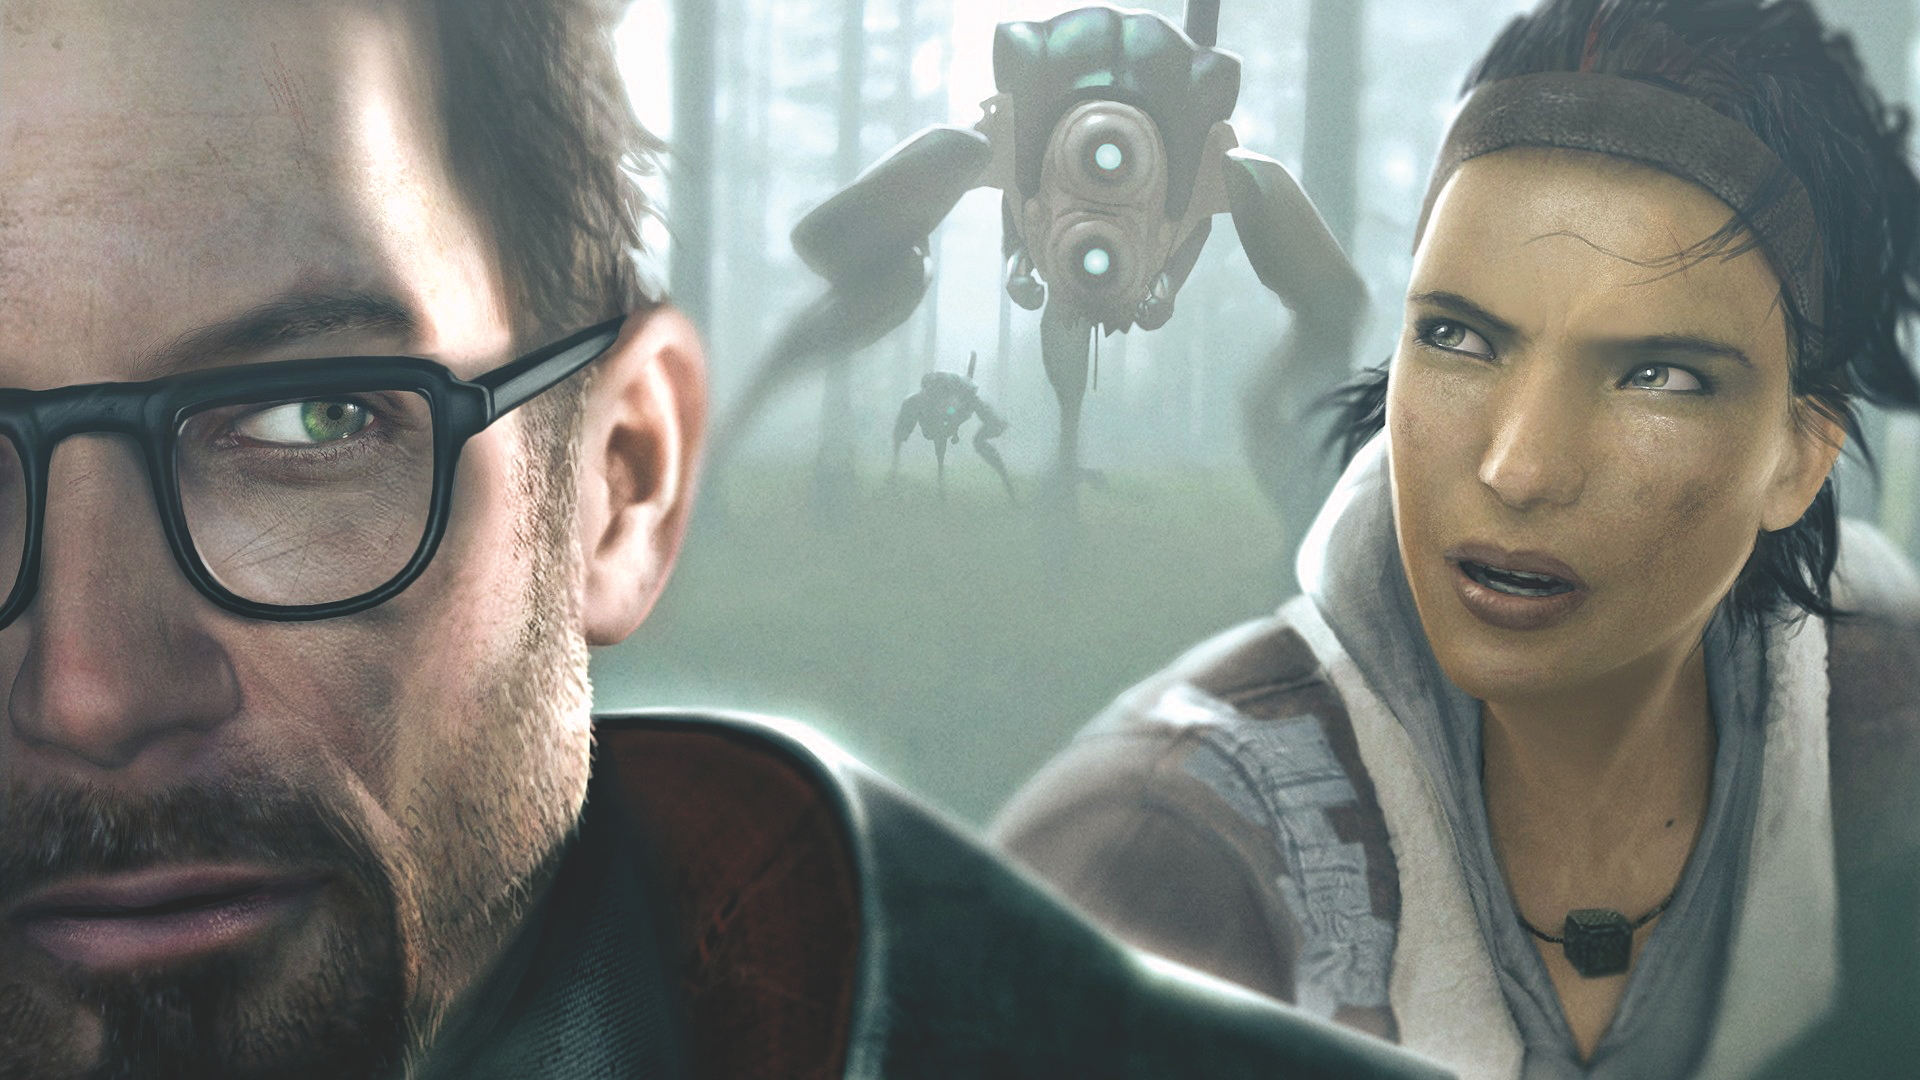 Prepare for Half-Life: Alyx with Half-Life 1 and 2 for $1 each